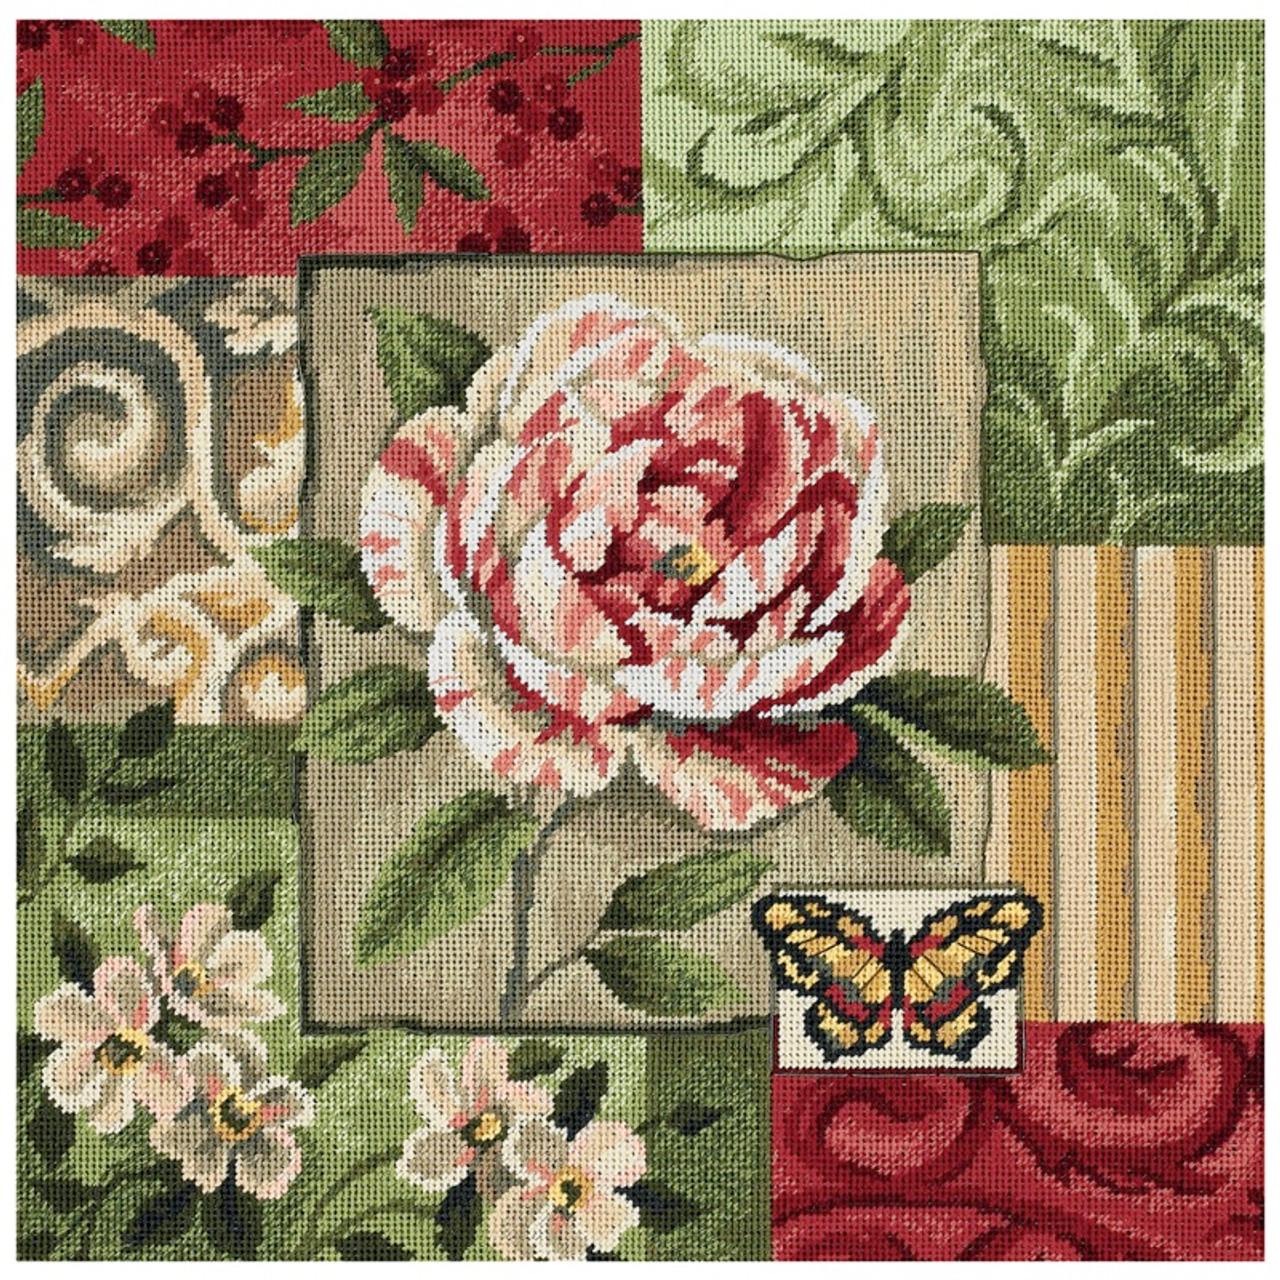 Dimensions Needlepoint Kit 14x14 Floral Splendor Stitched in Yarn